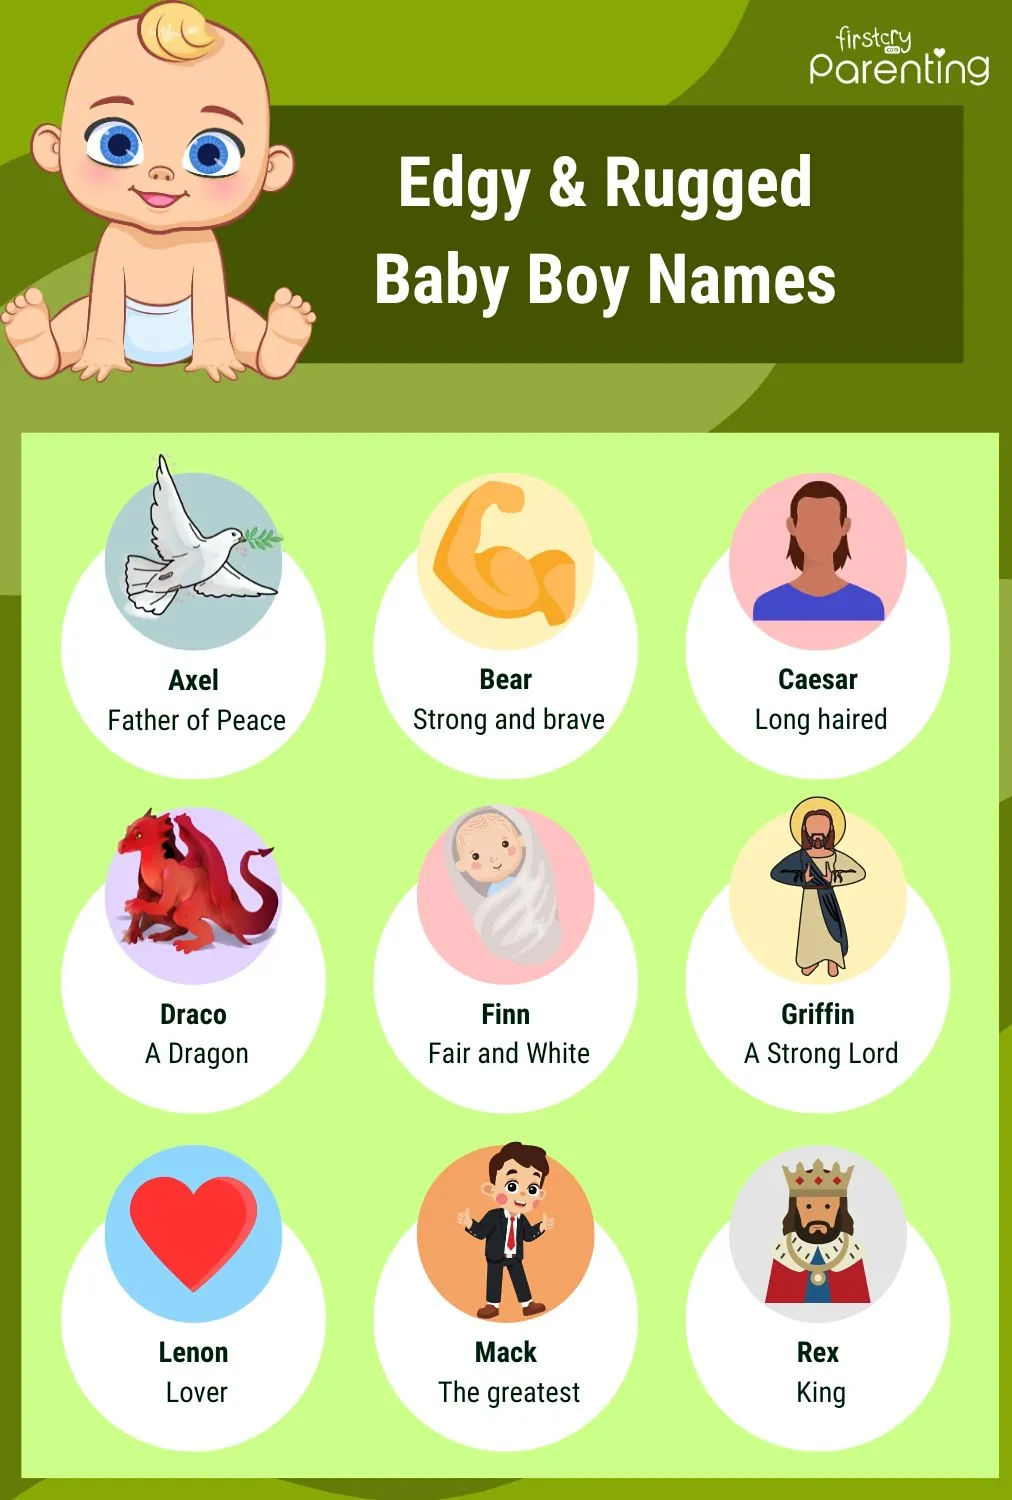 Infographic: Edgy & Rugged Baby Boy Names